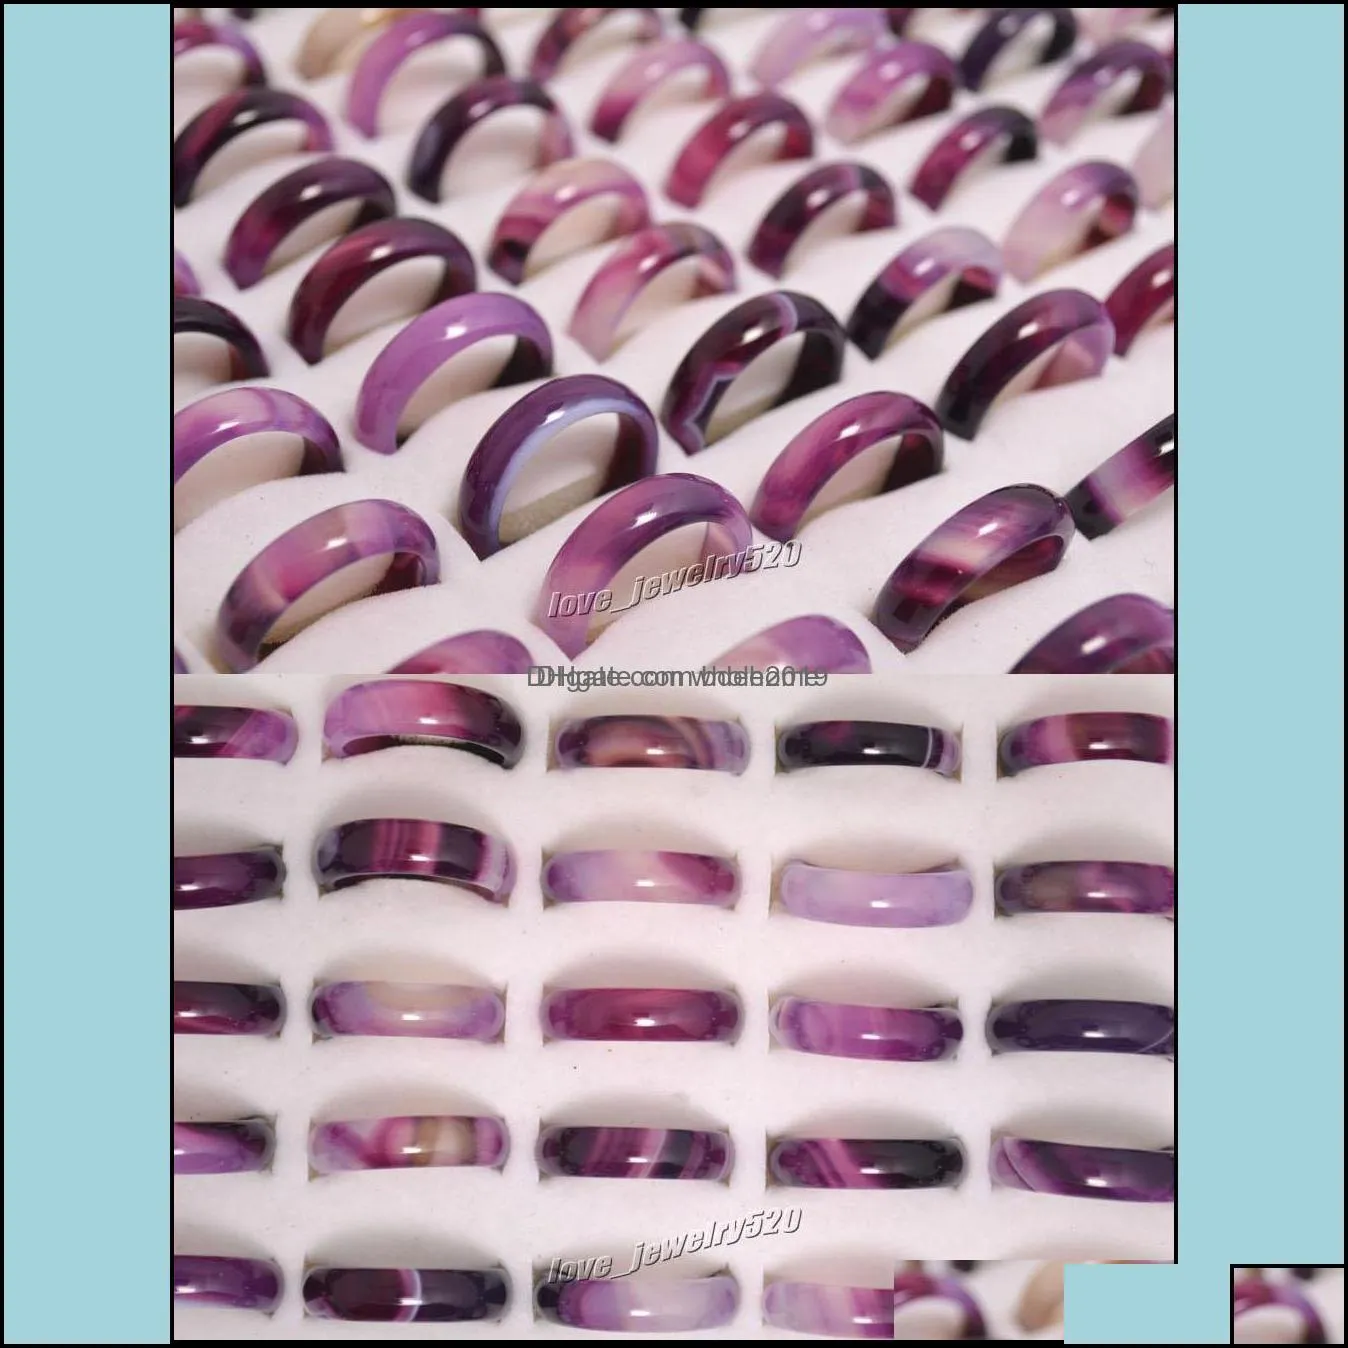 band rings jewelry new beautif smooth purple black round solid jade/agate gem stone 20pcs lots drop deliver dhwda